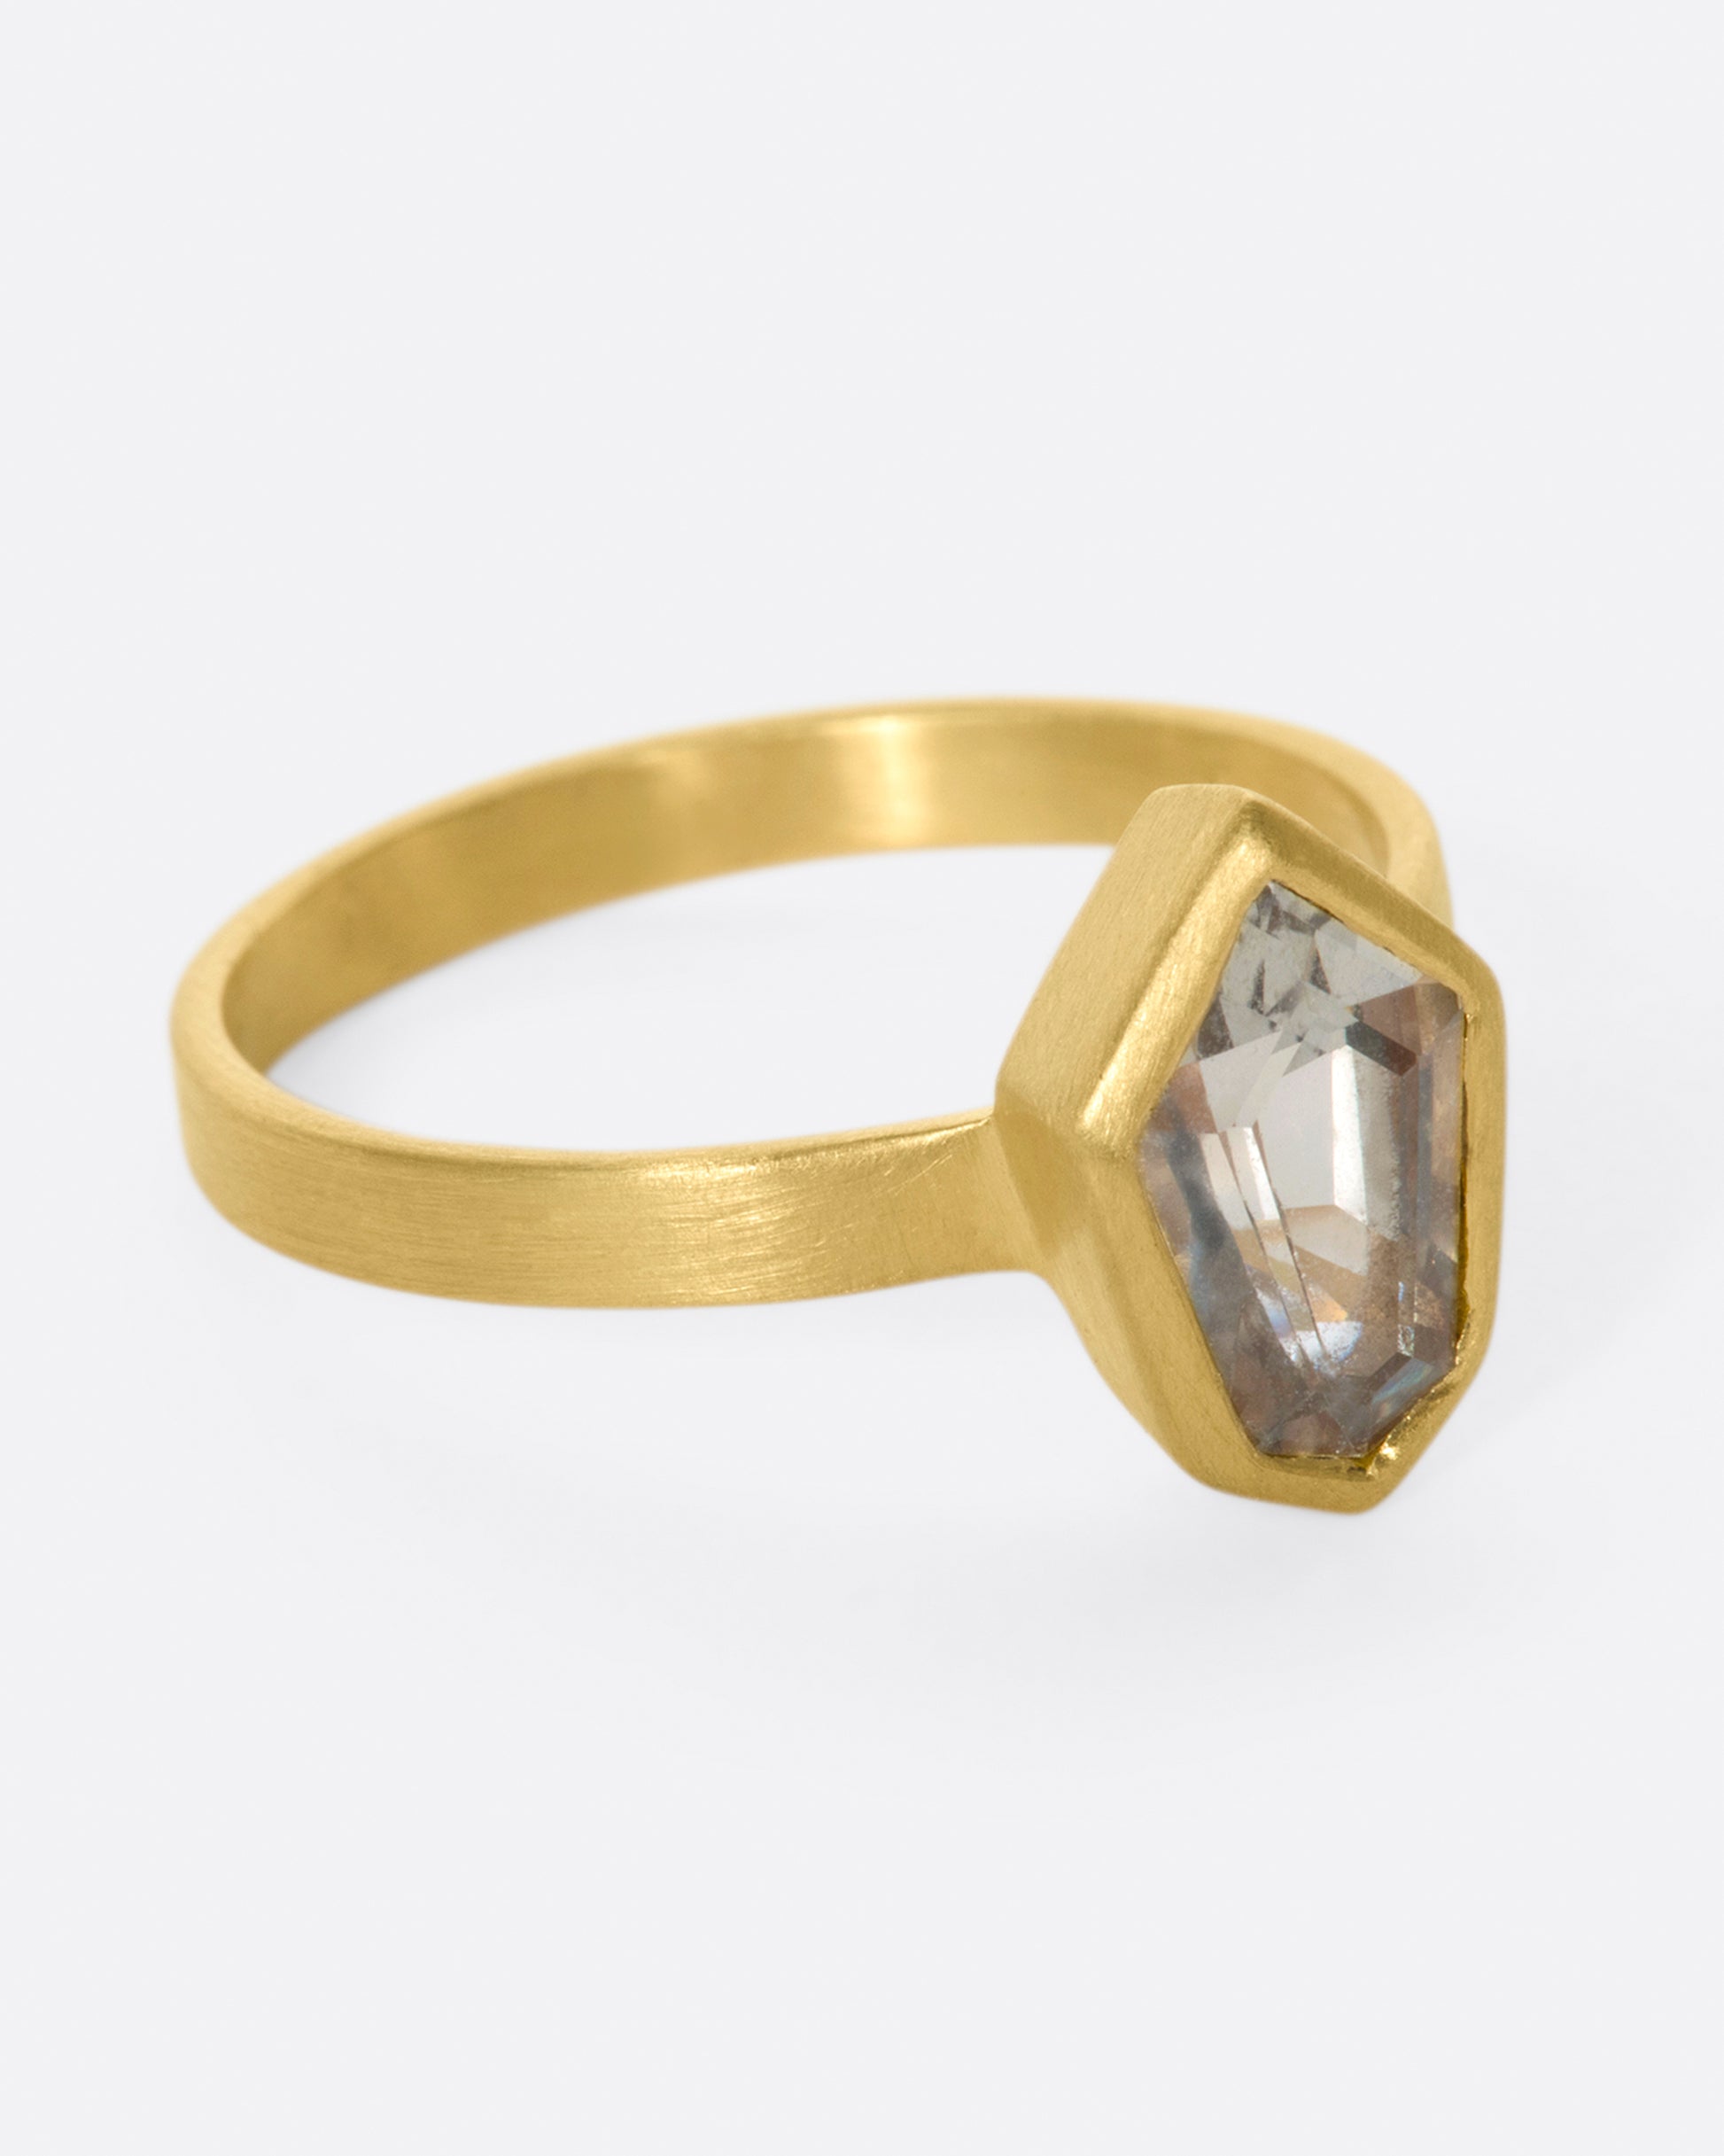 A matte gold solitaire ring with a bezel set, shield shaped sapphire.